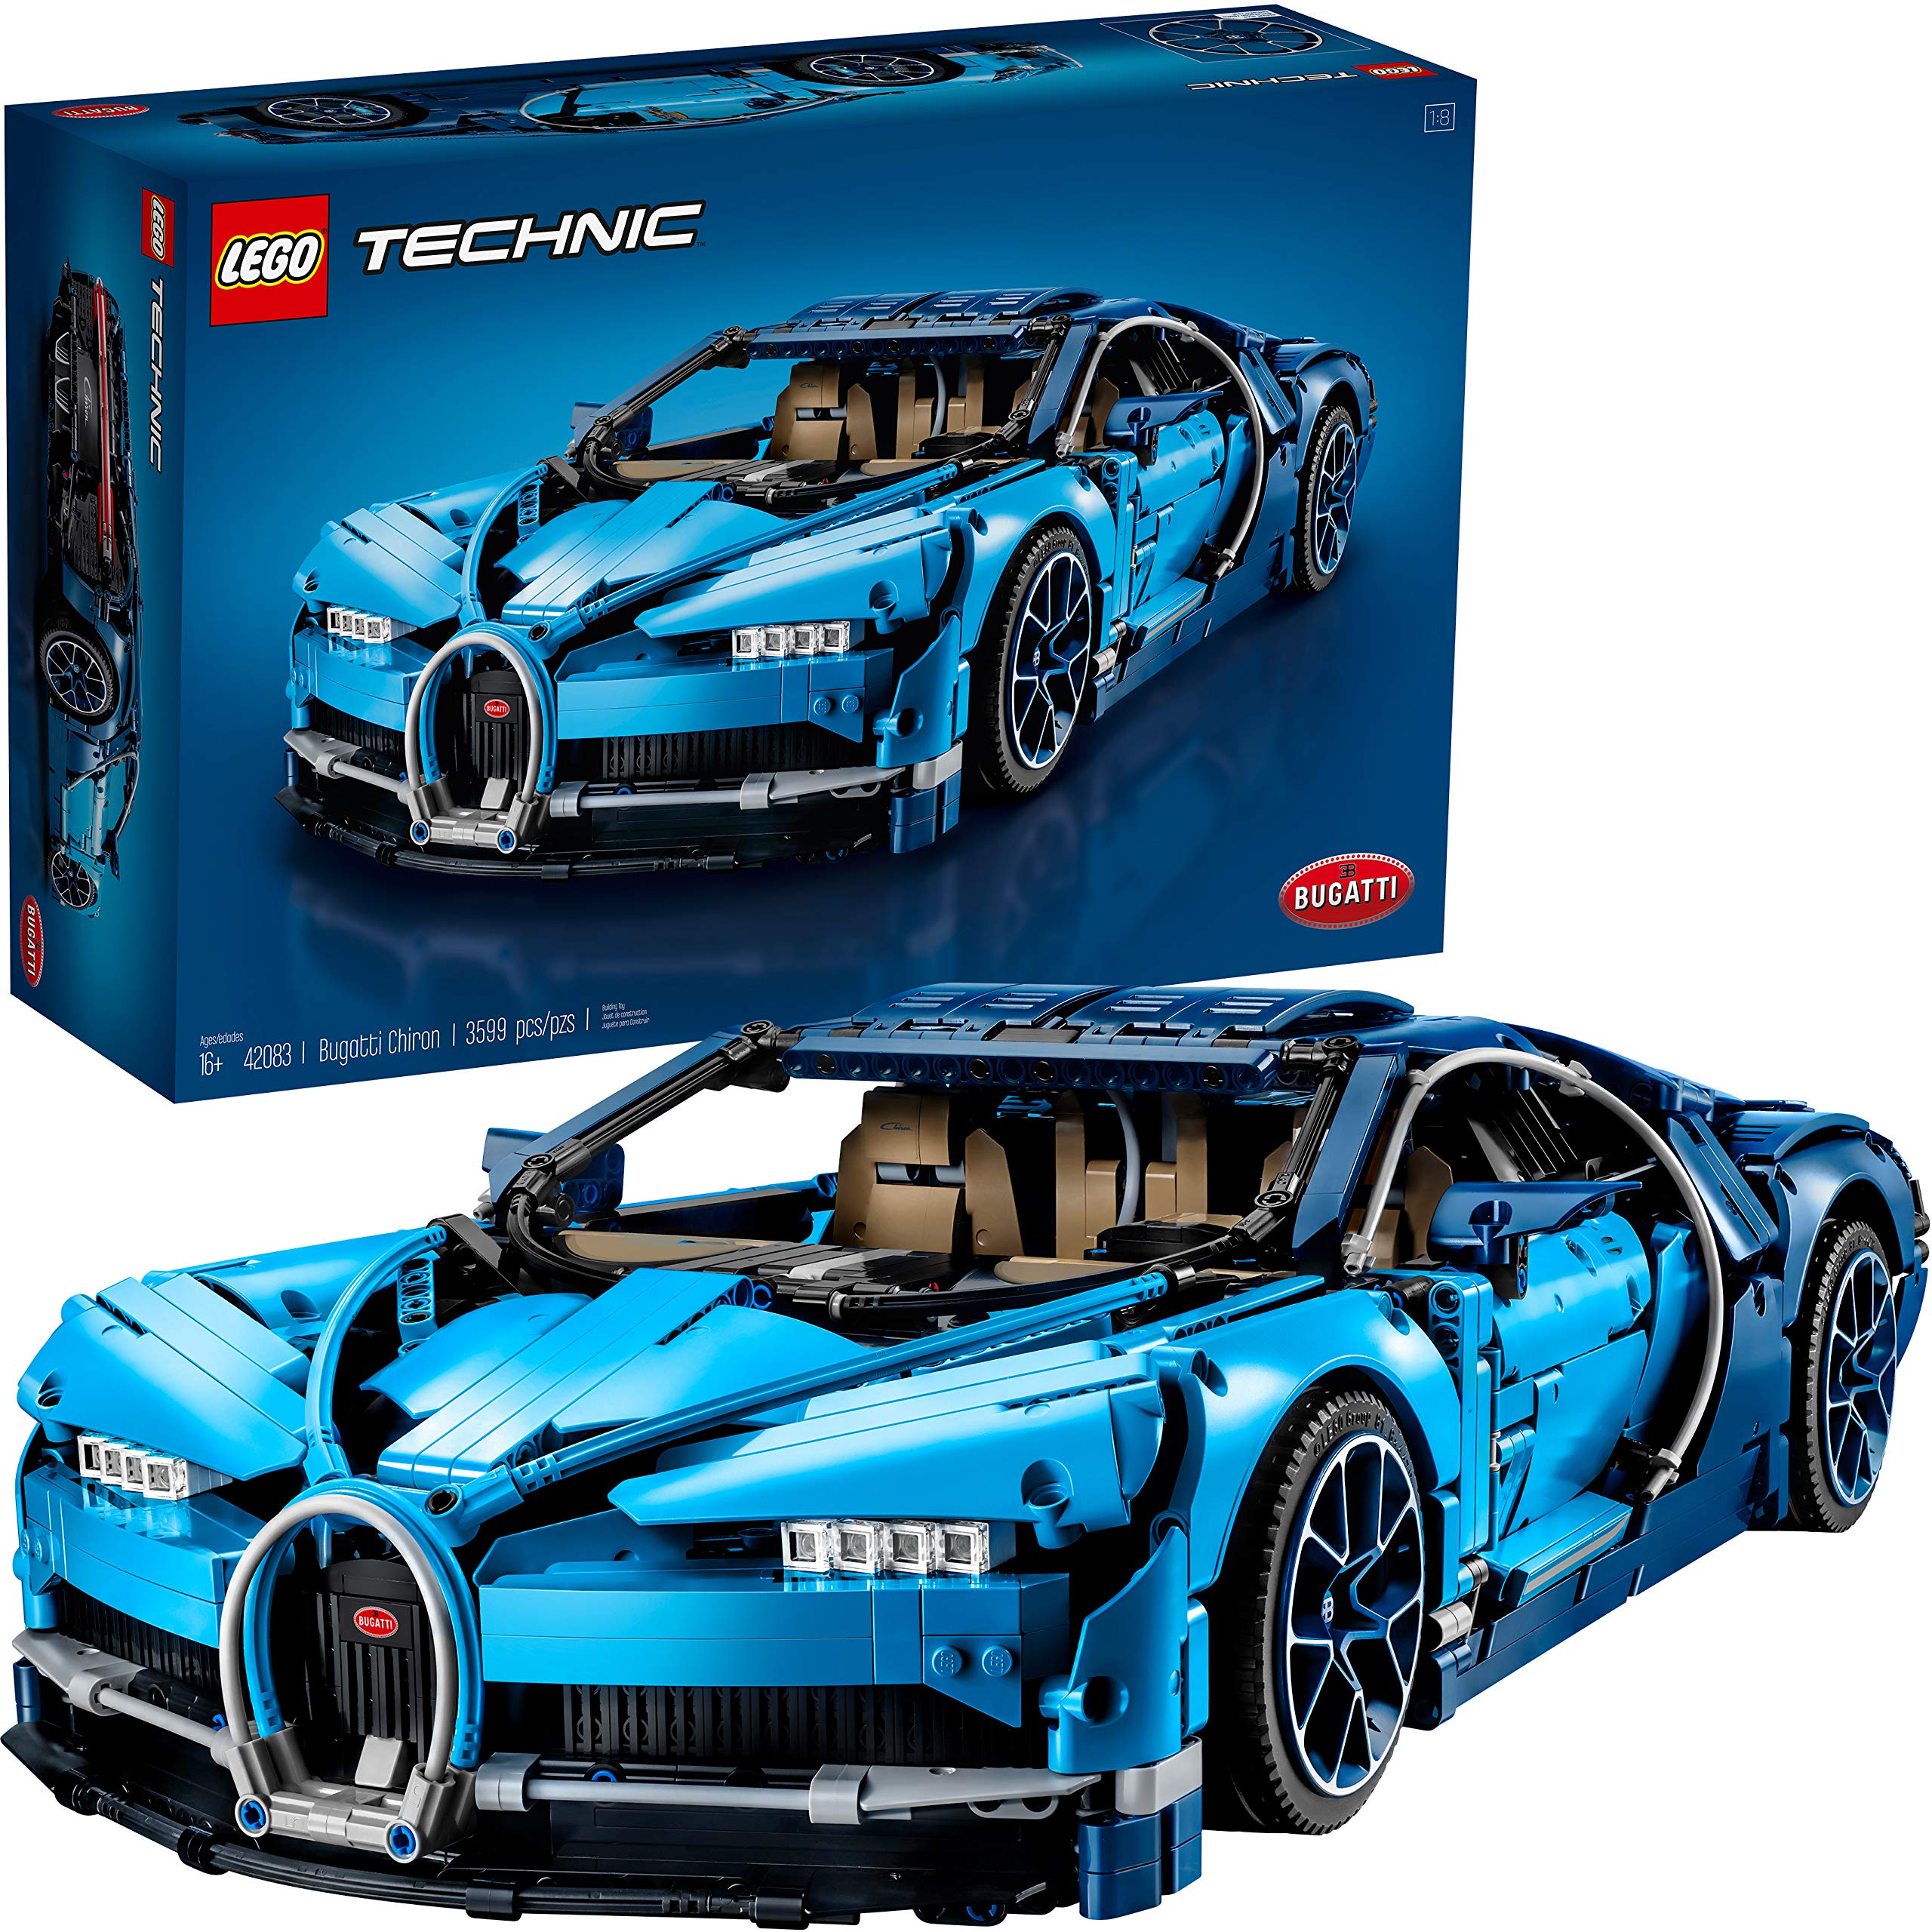 LEGO Technic Bugatti Chiron 42083 Race Car Building Kit and Engineering Toy, Adult Collectible Sports Car with Scale Model Engine (3599 Pieces) - $349.99